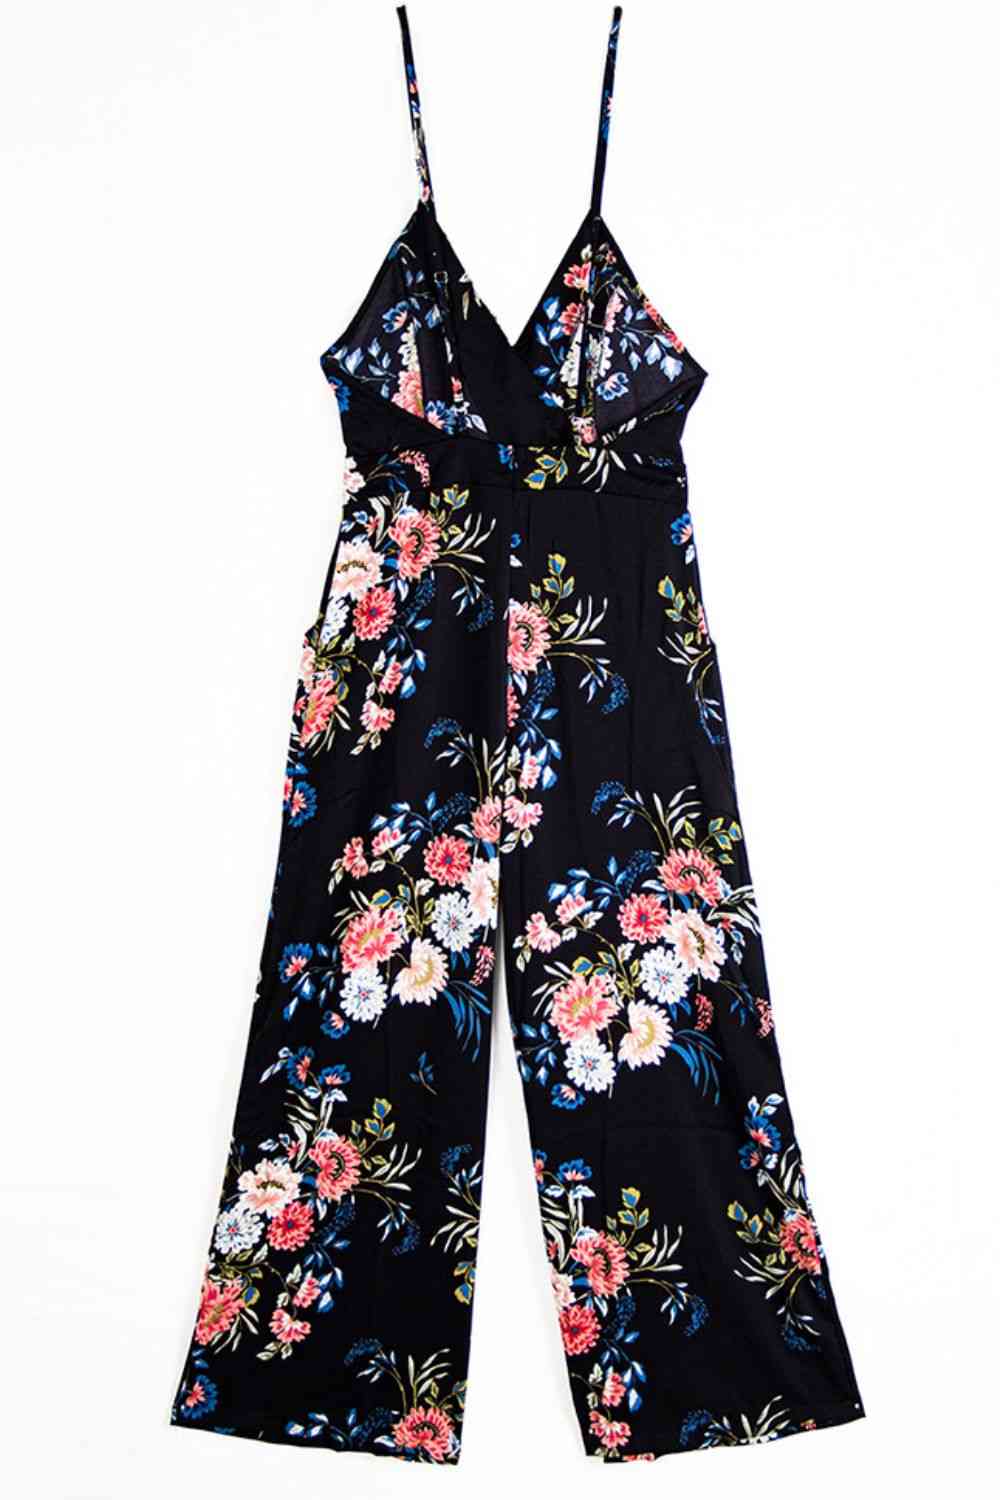 Floral Spaghetti Strap Wide Leg Jumpsuit with Pockets - TRENDMELO